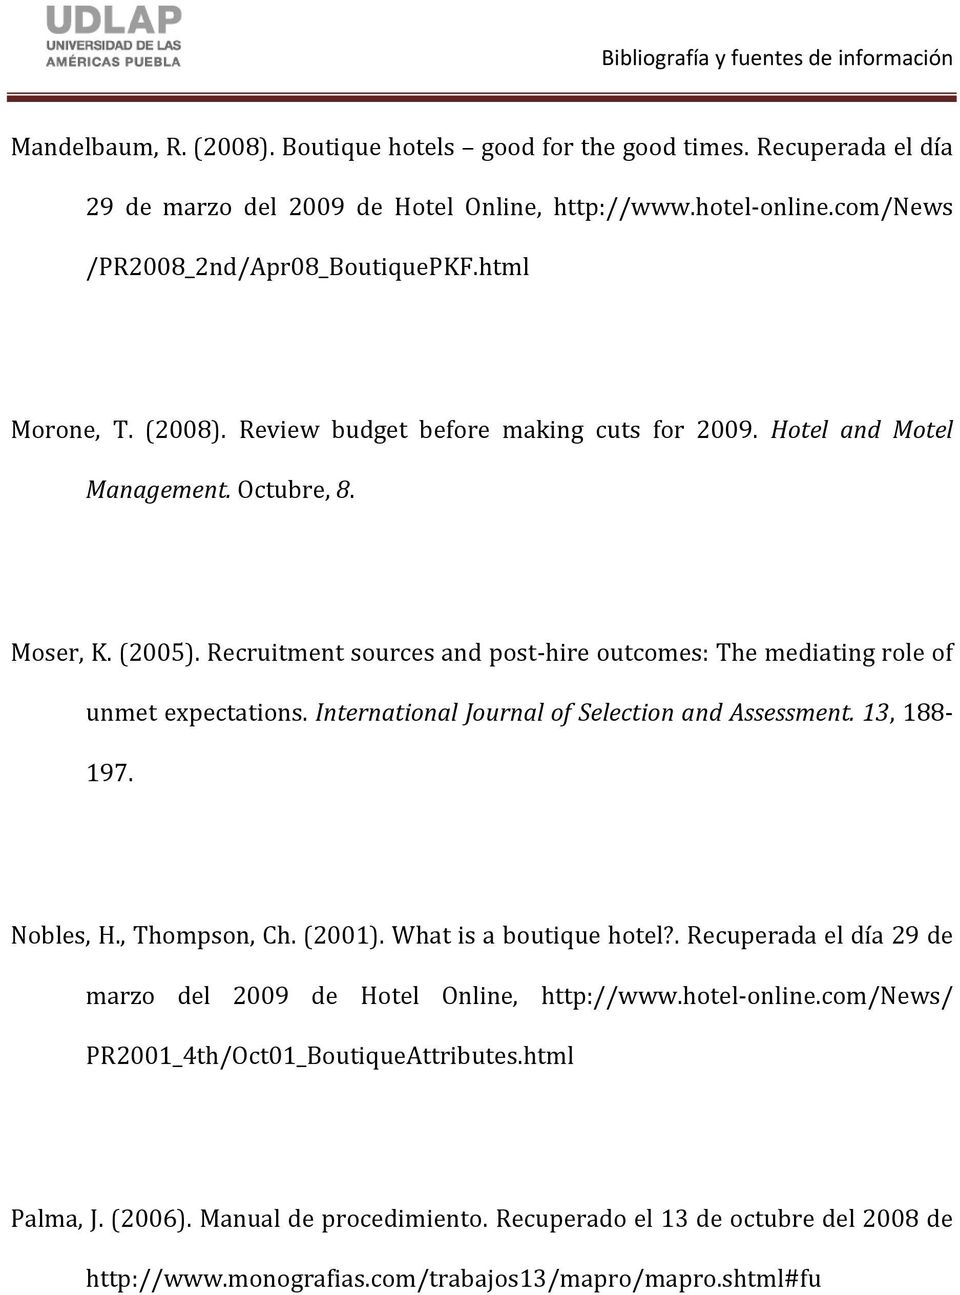 International Journal of Selection and Assessment. 13, 188-197. Nobles, H., Thompson, Ch. (2001). What is a boutique hotel?. Recuperada el día 29 de marzo del 2009 de Hotel Online, http://www.